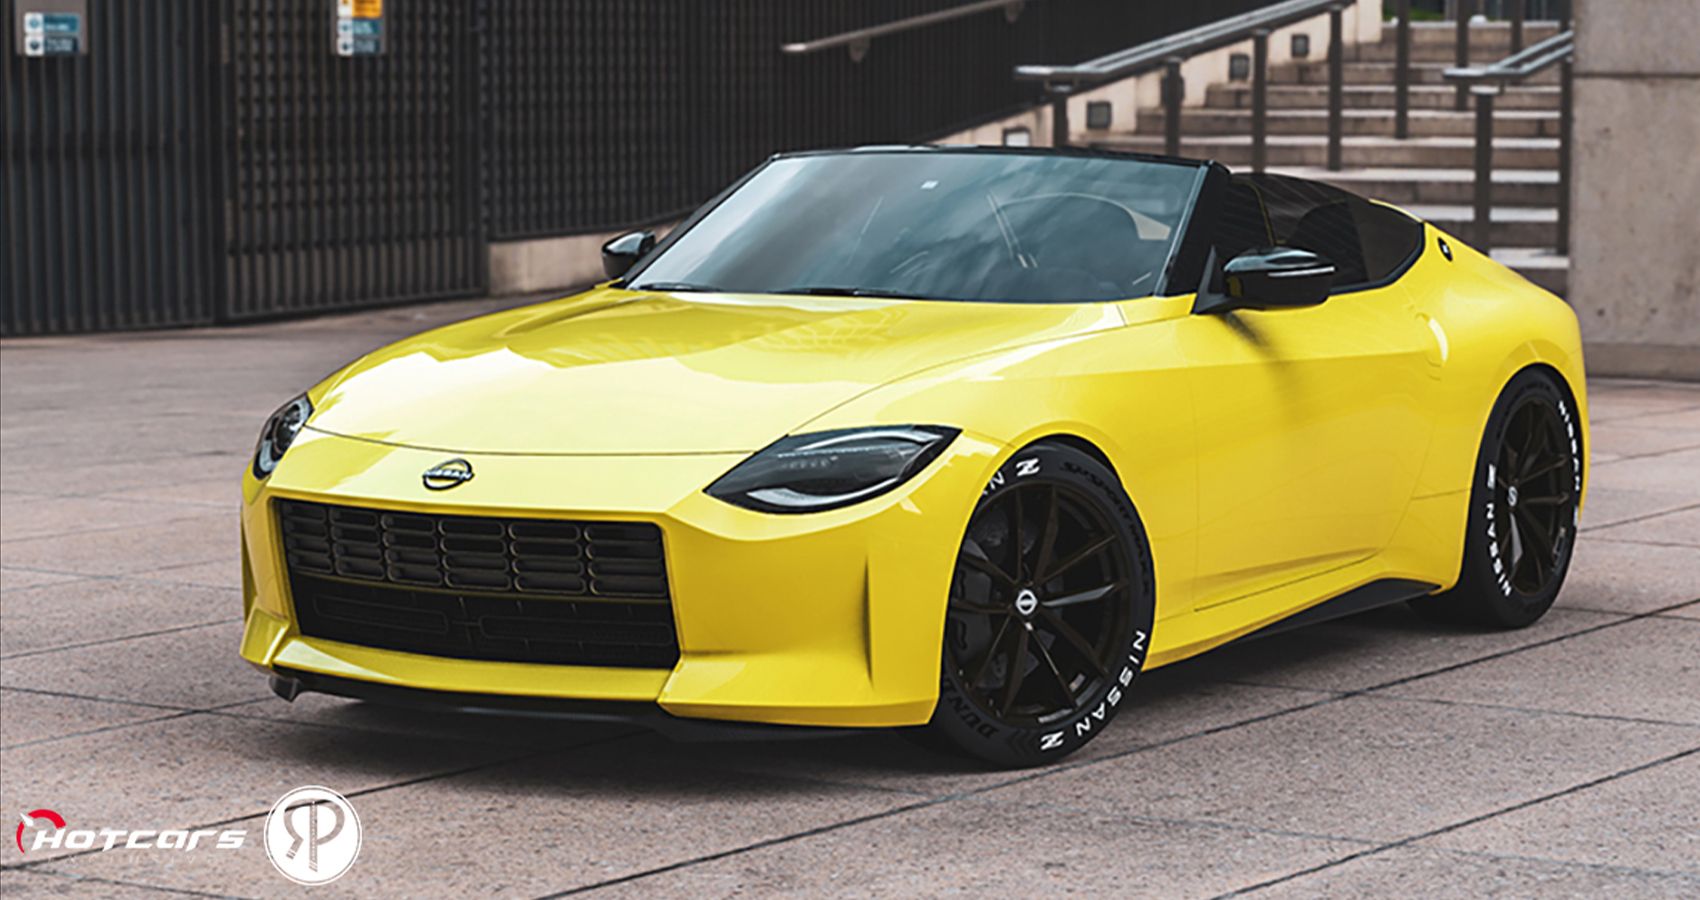 Front 3/4 view of the Z Roadster render in yellow, wheels turned